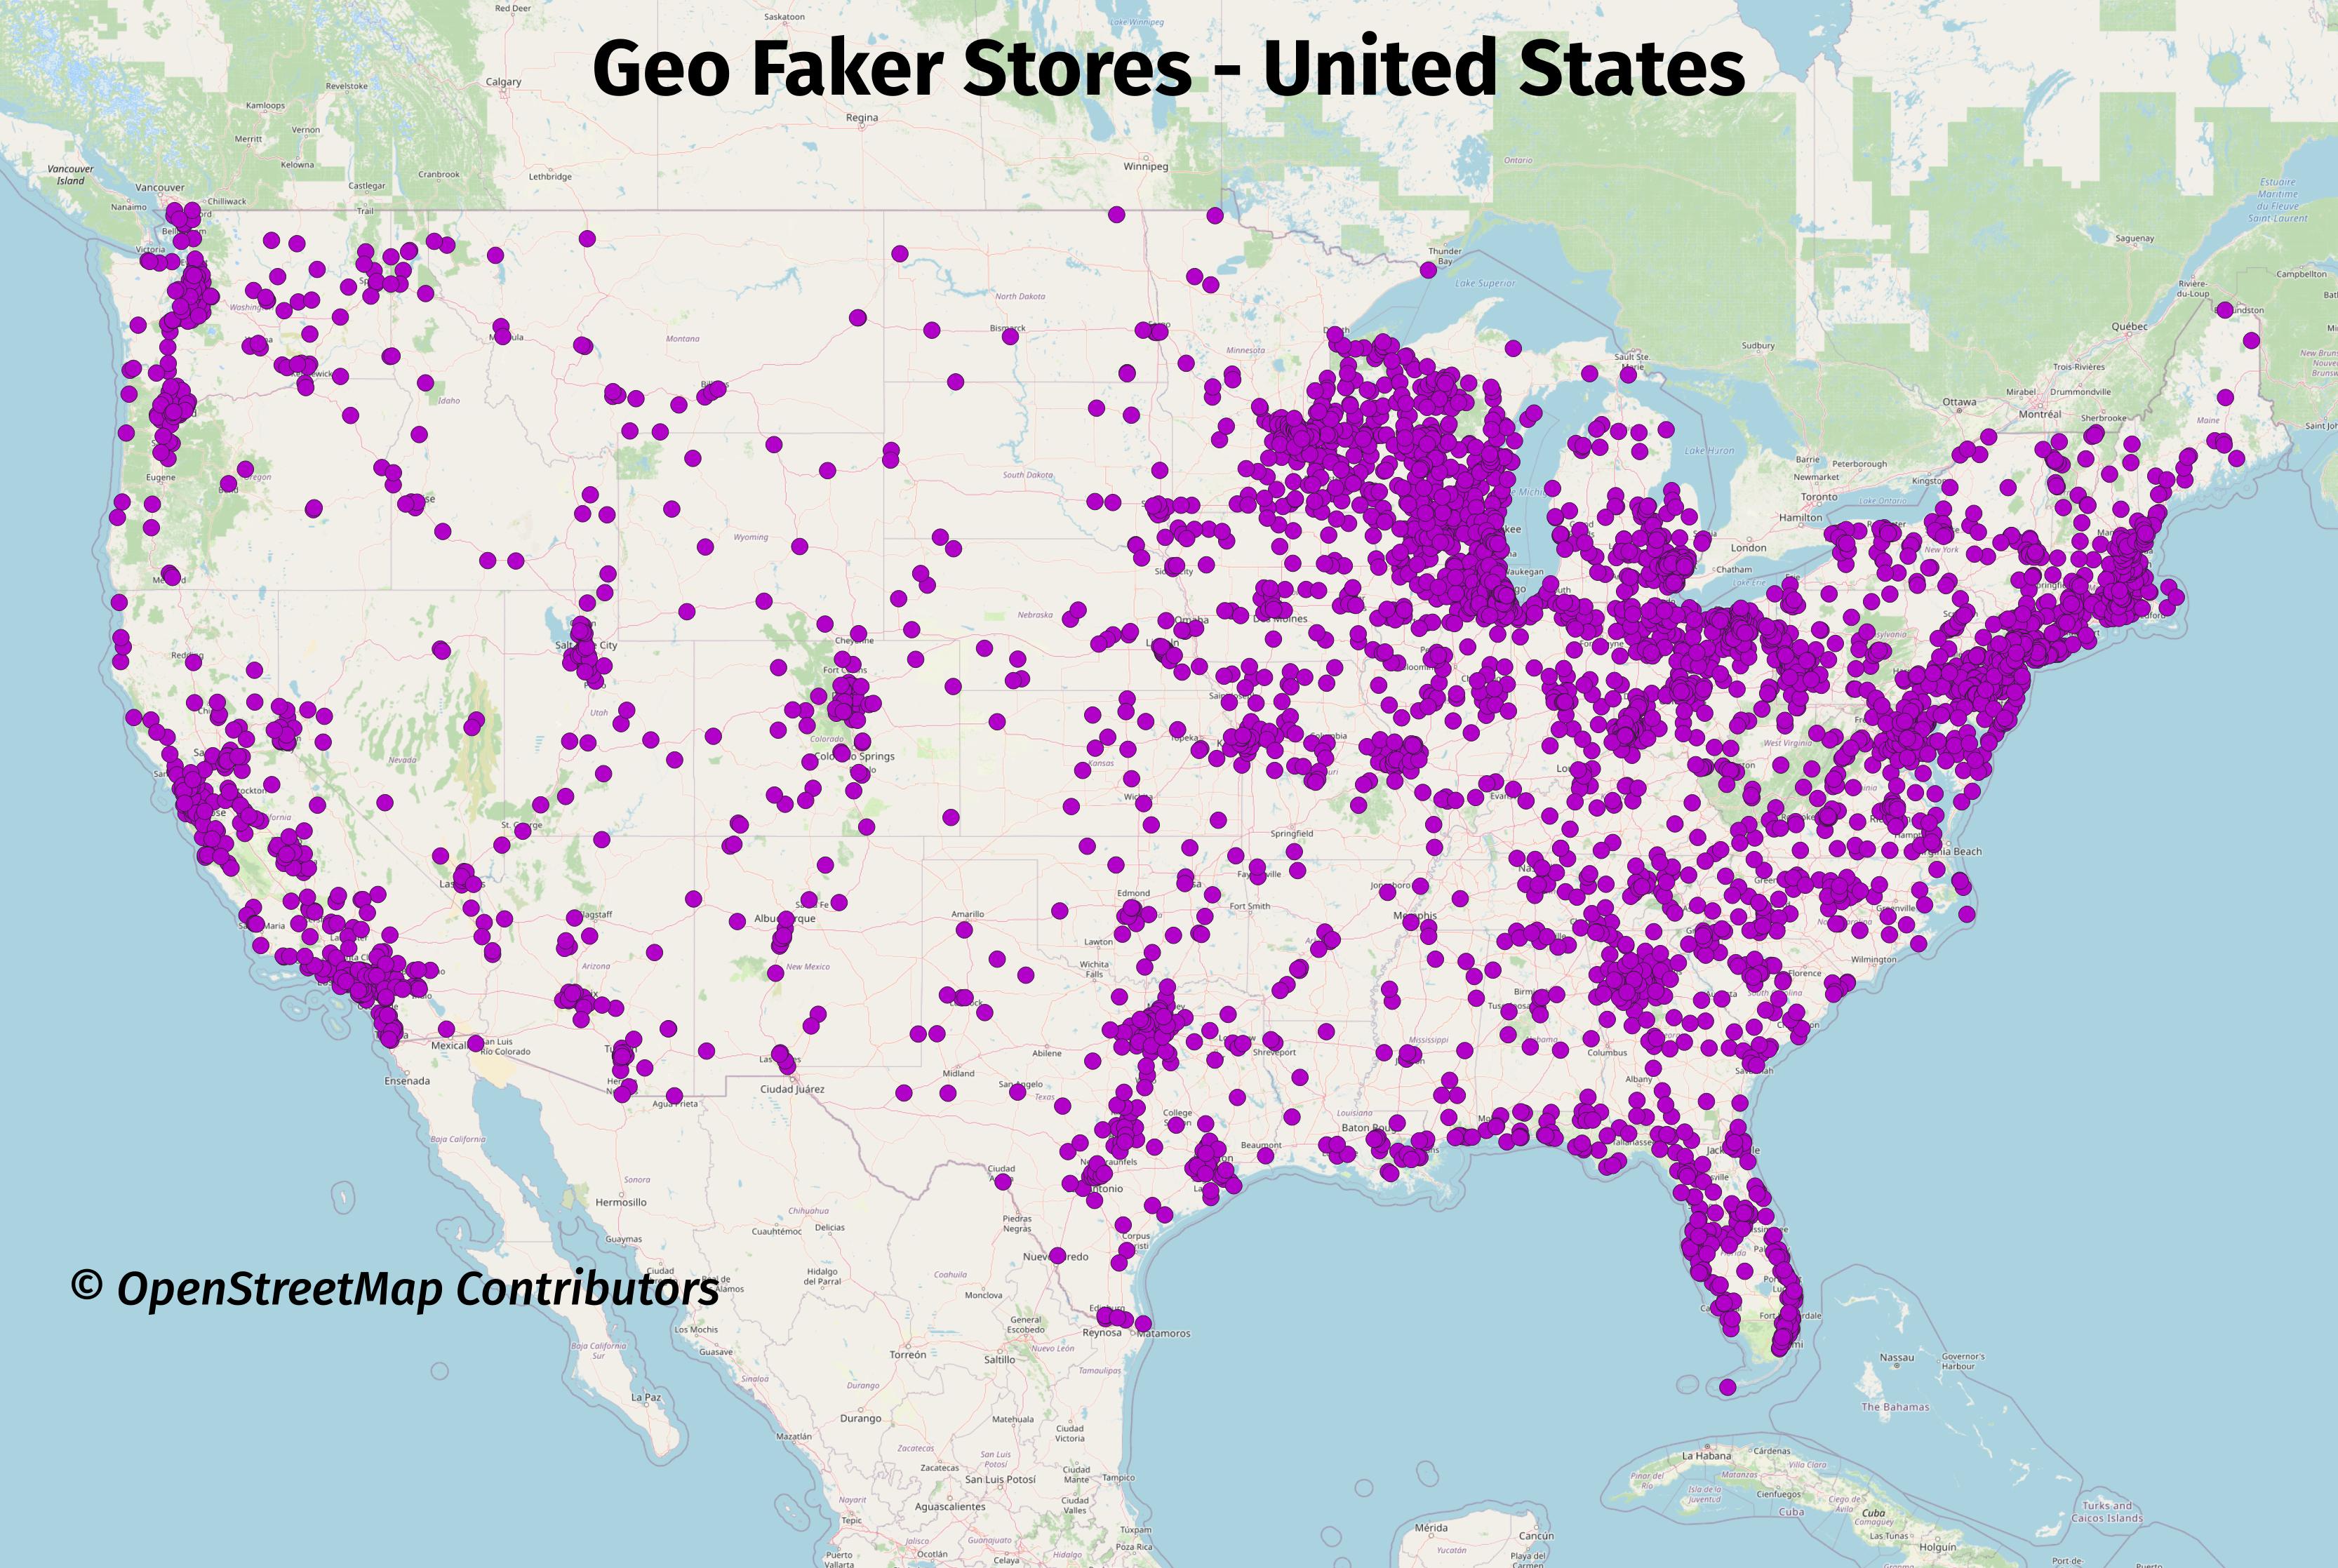 Map of United States (lower 48) with the title "Geo Faker Stores - United States".  Purple dots representing fake stores are indicated across the entire country.  Copyright OpenStreetMap Contributors